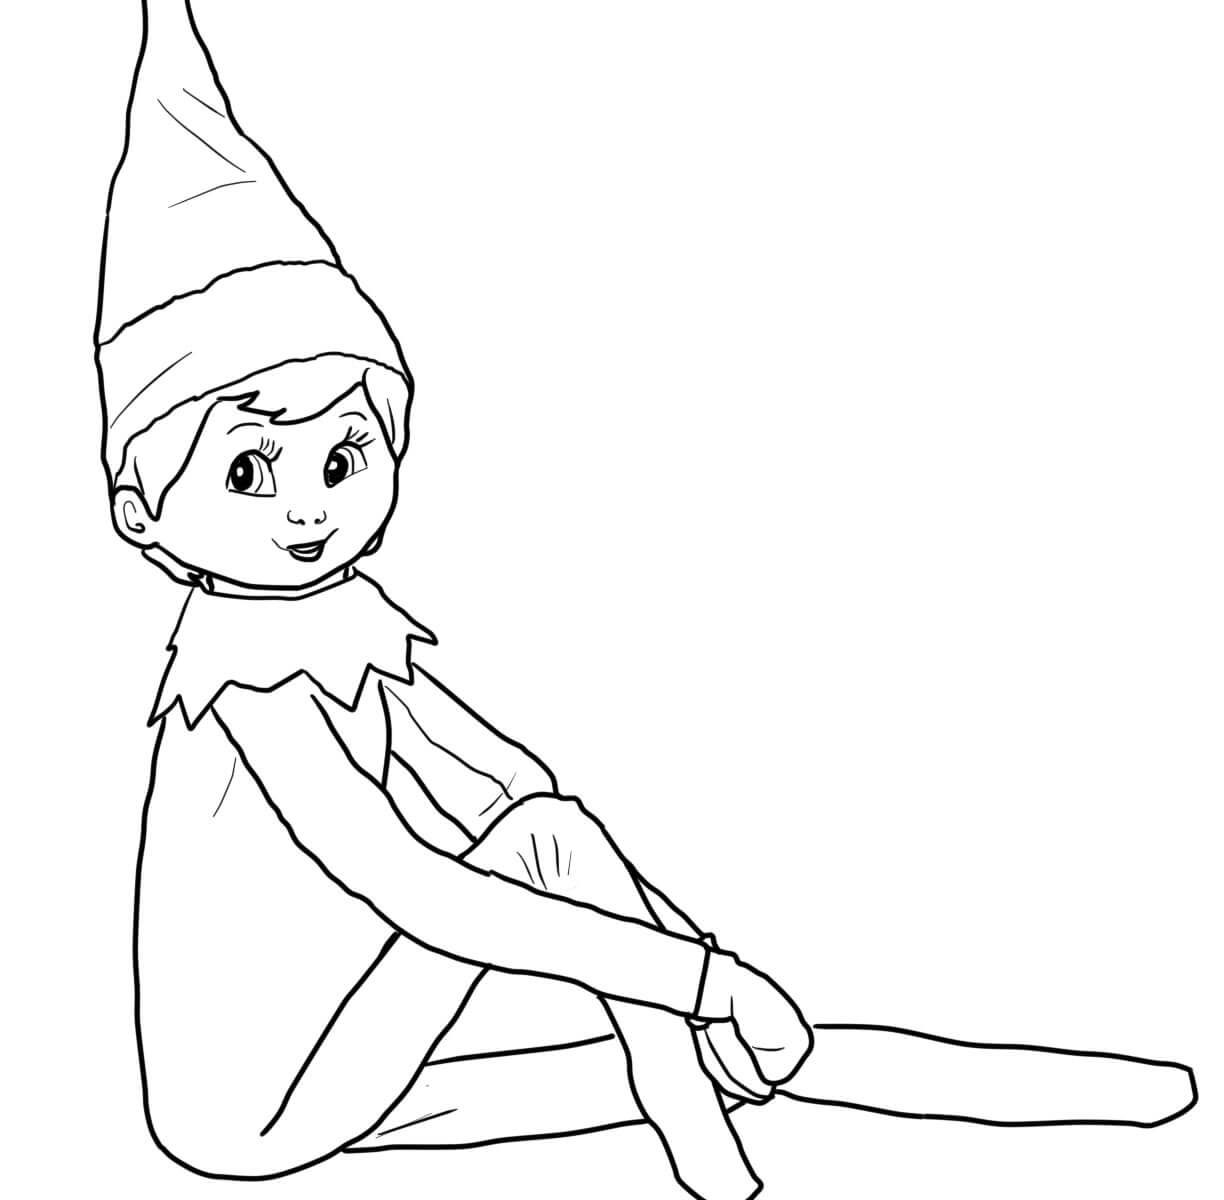 Elf On The Shelf Coloring Pages Printable at GetColorings